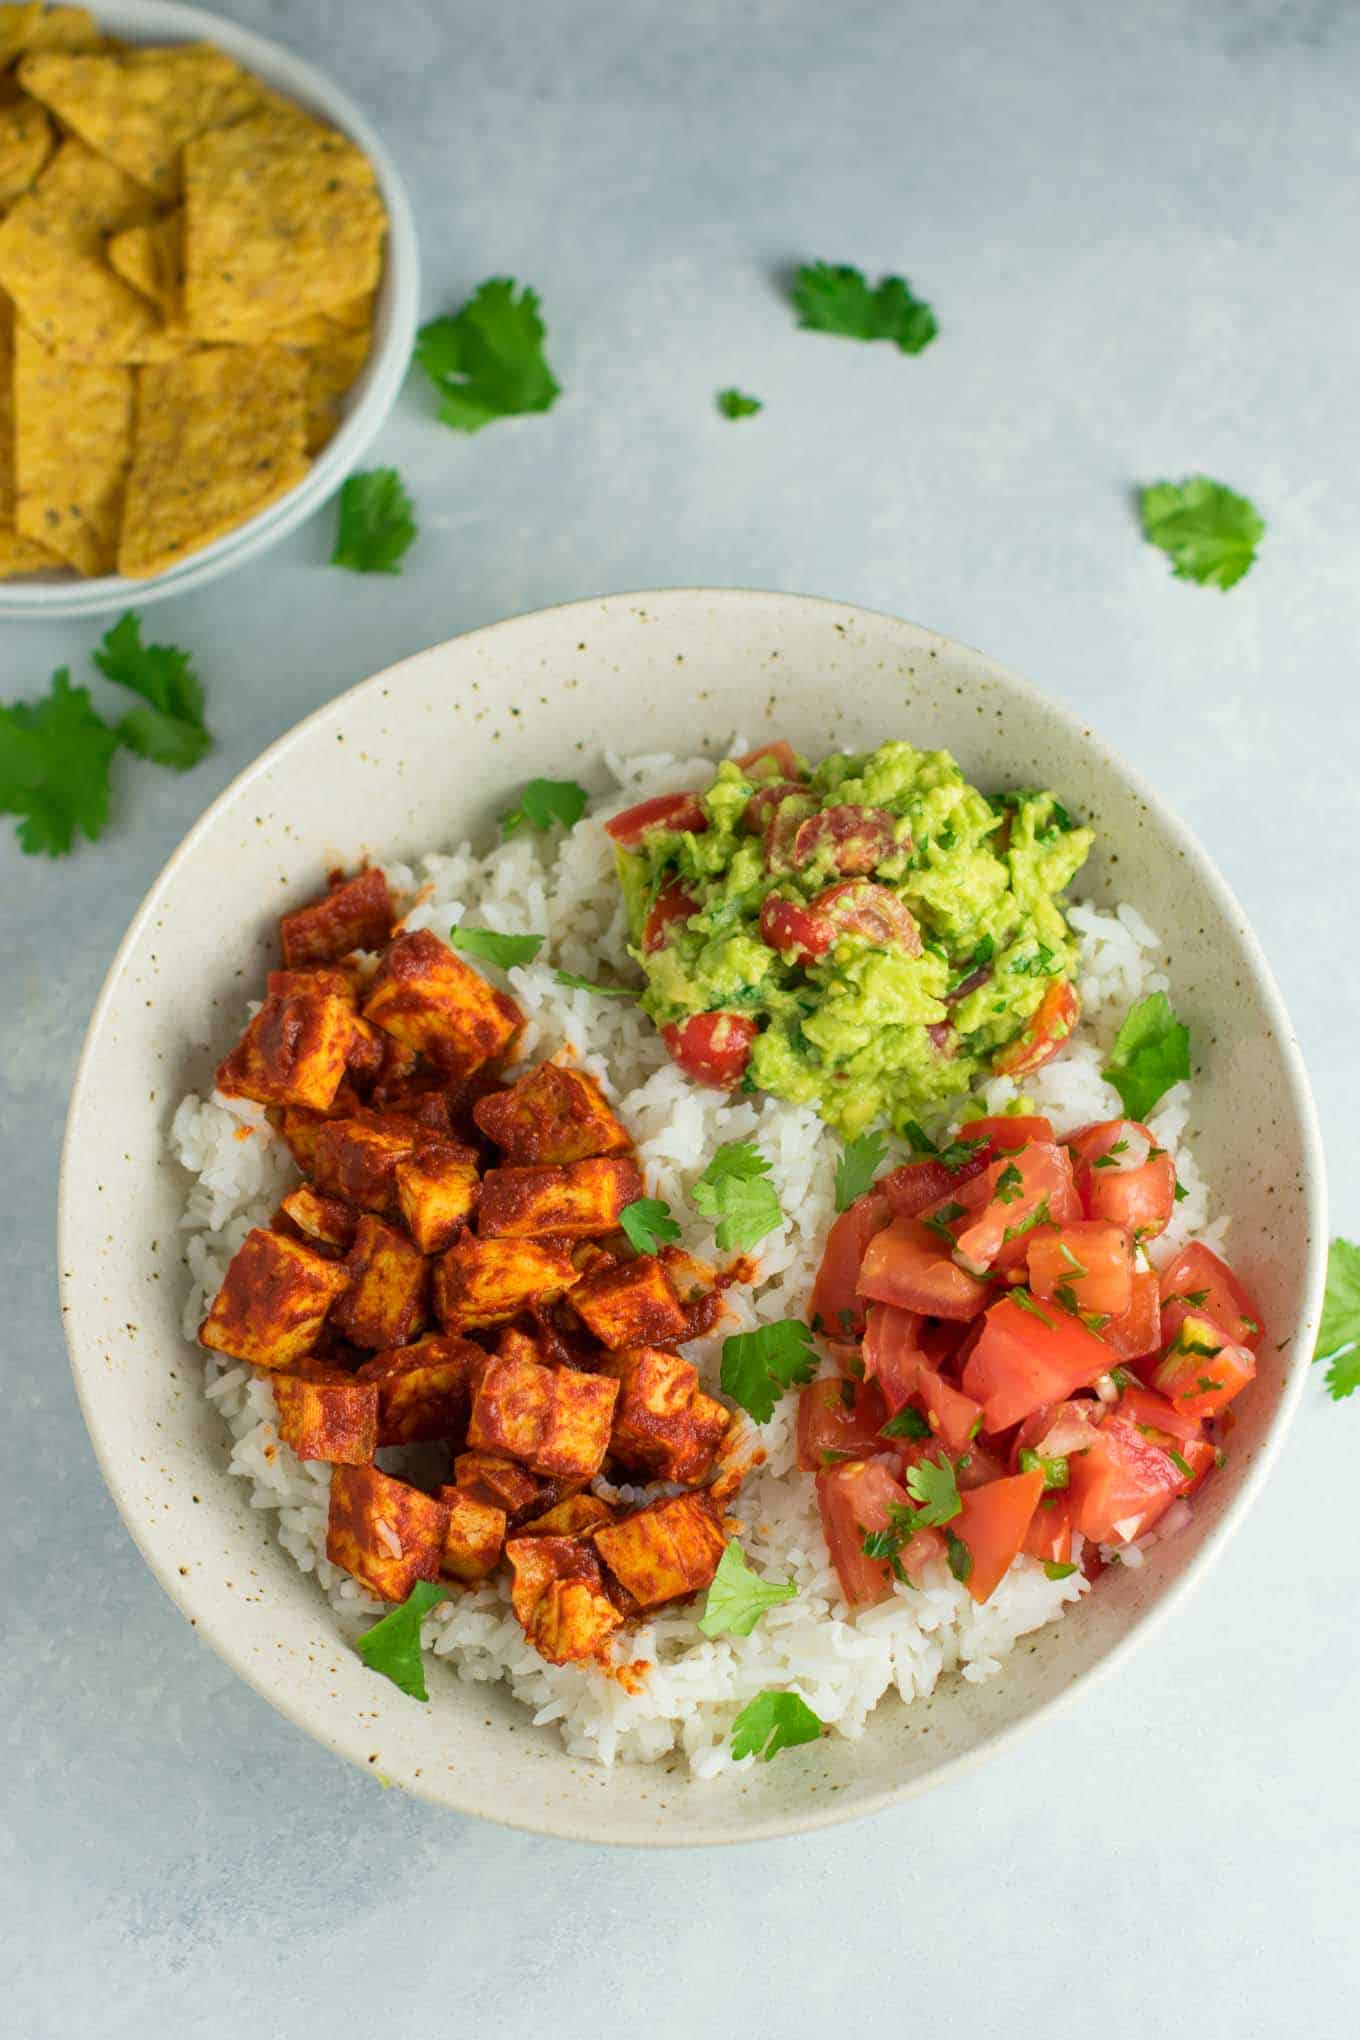 vegan dinner recipes - Easy enchilada tofu burrito bowls with homemade guacamole and salsa. Bring chipotle to your kitchen with this delicious recipe! #vegan #burritobowls #tofuburritobowls